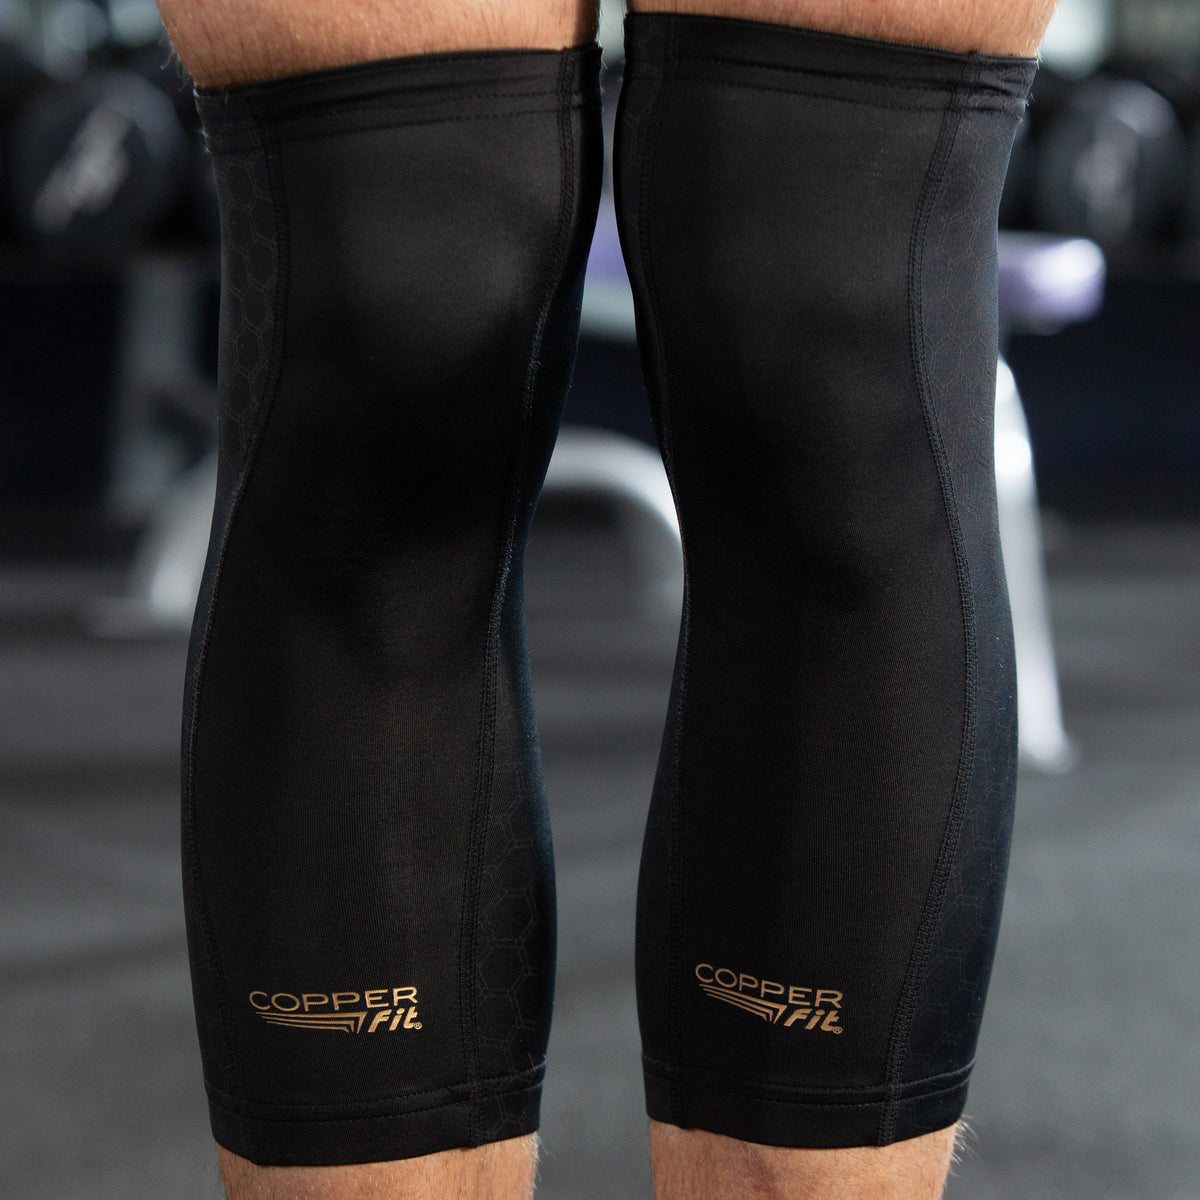 How Tight Should Knee Sleeves Fit?